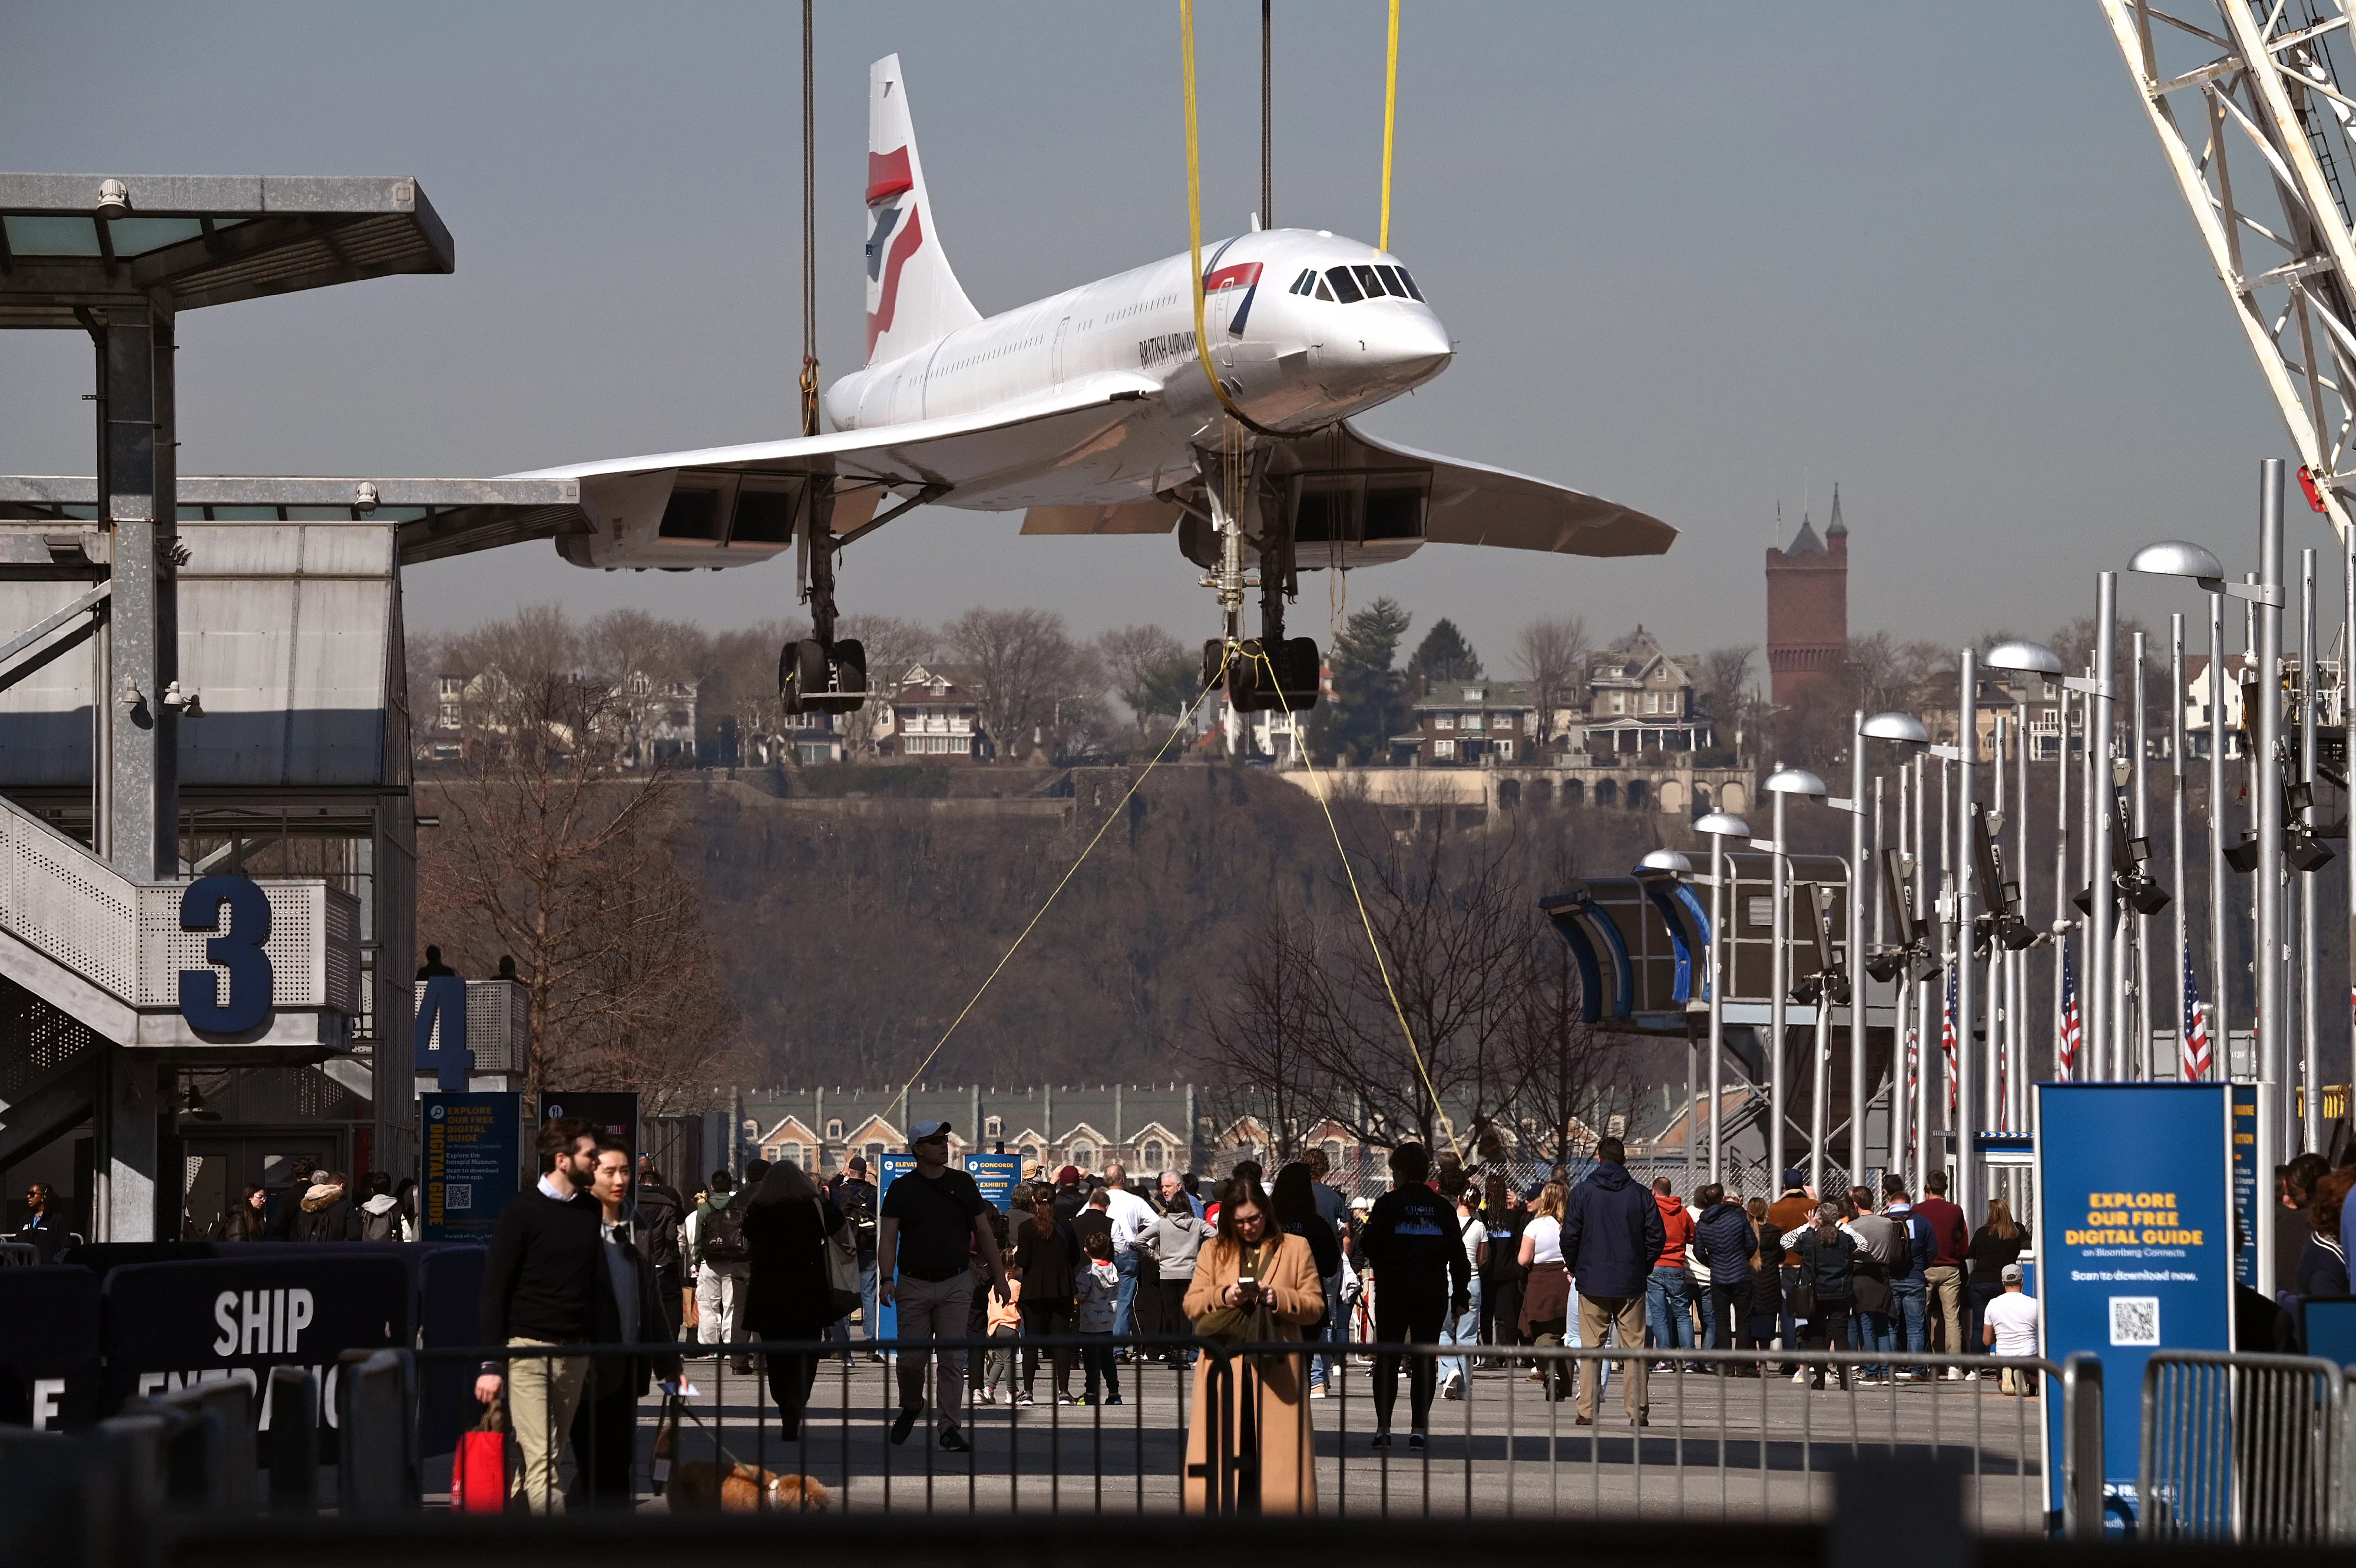 ny-concorde-supersonic-jet-returns-to-intrepid-museum-after-restoration